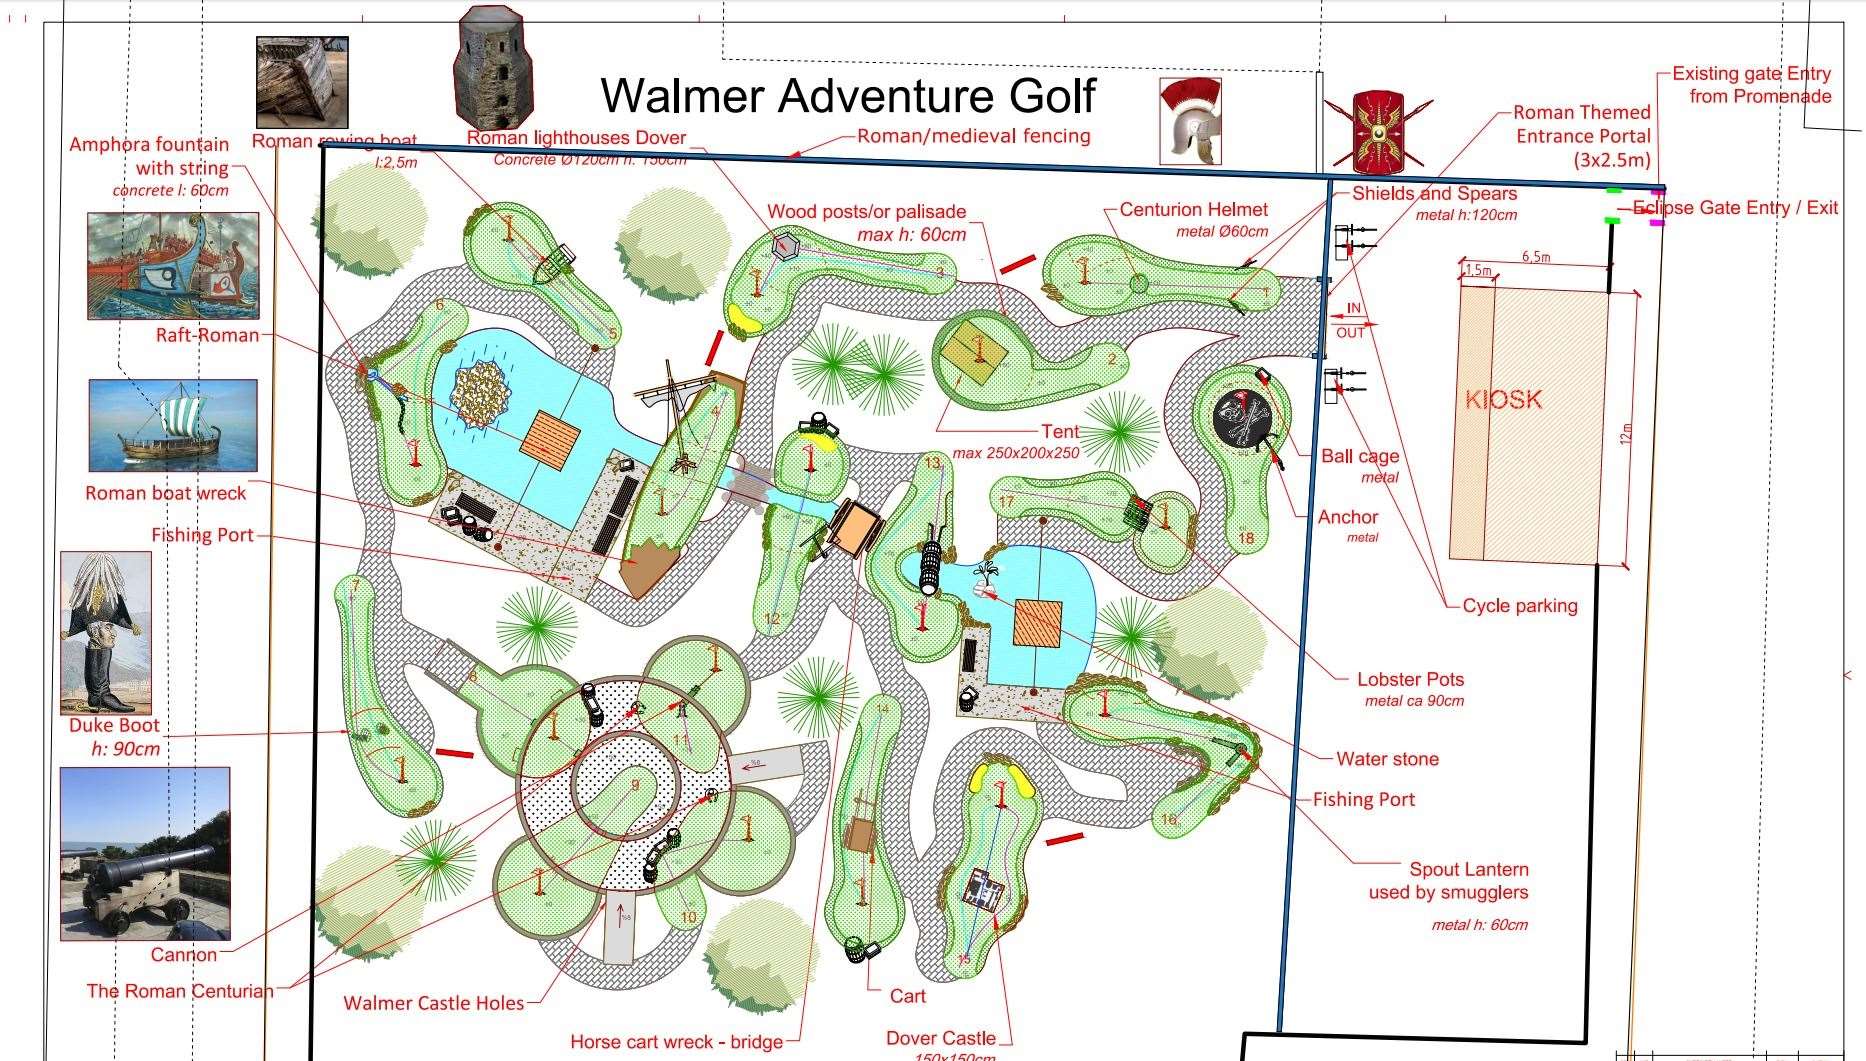 The proposed design of the new adventure golf course in Walmer Picture: Dover council's Planning Portal